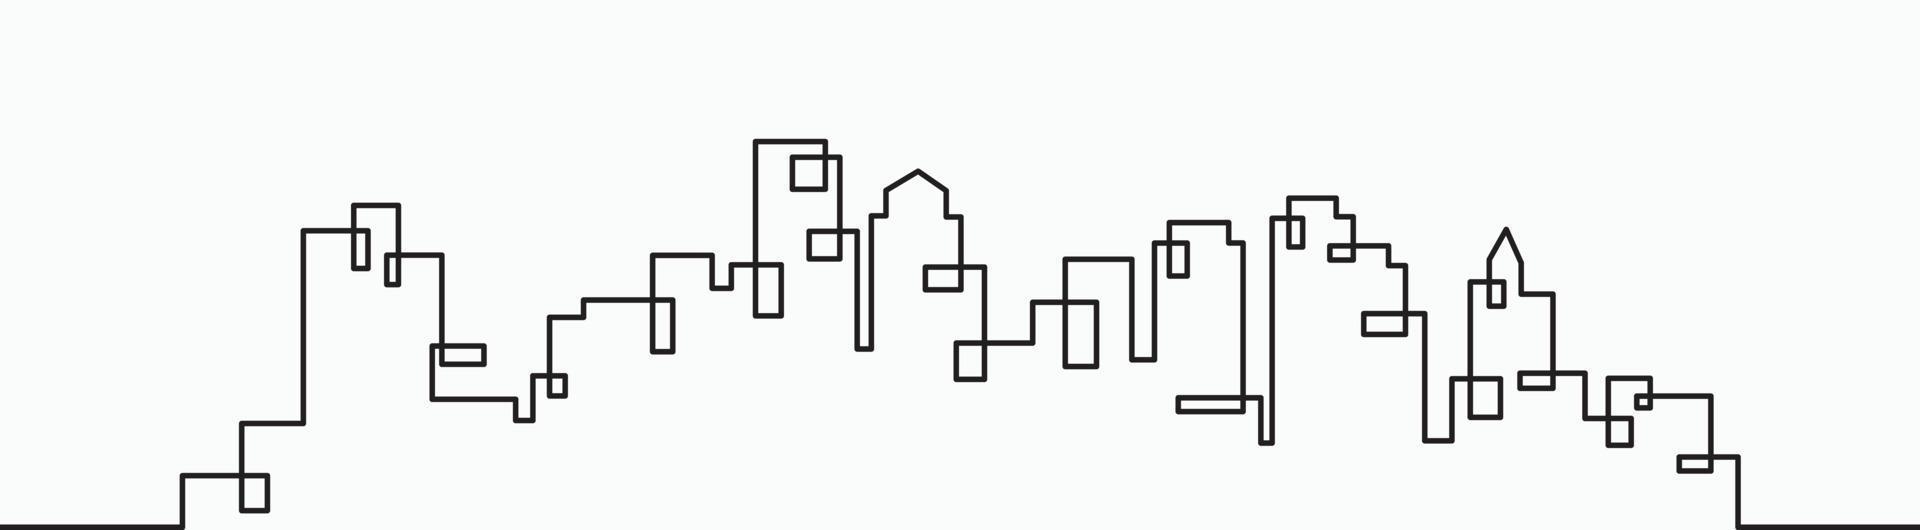 Modern City Skyline continuous outline drawing on white background. vector